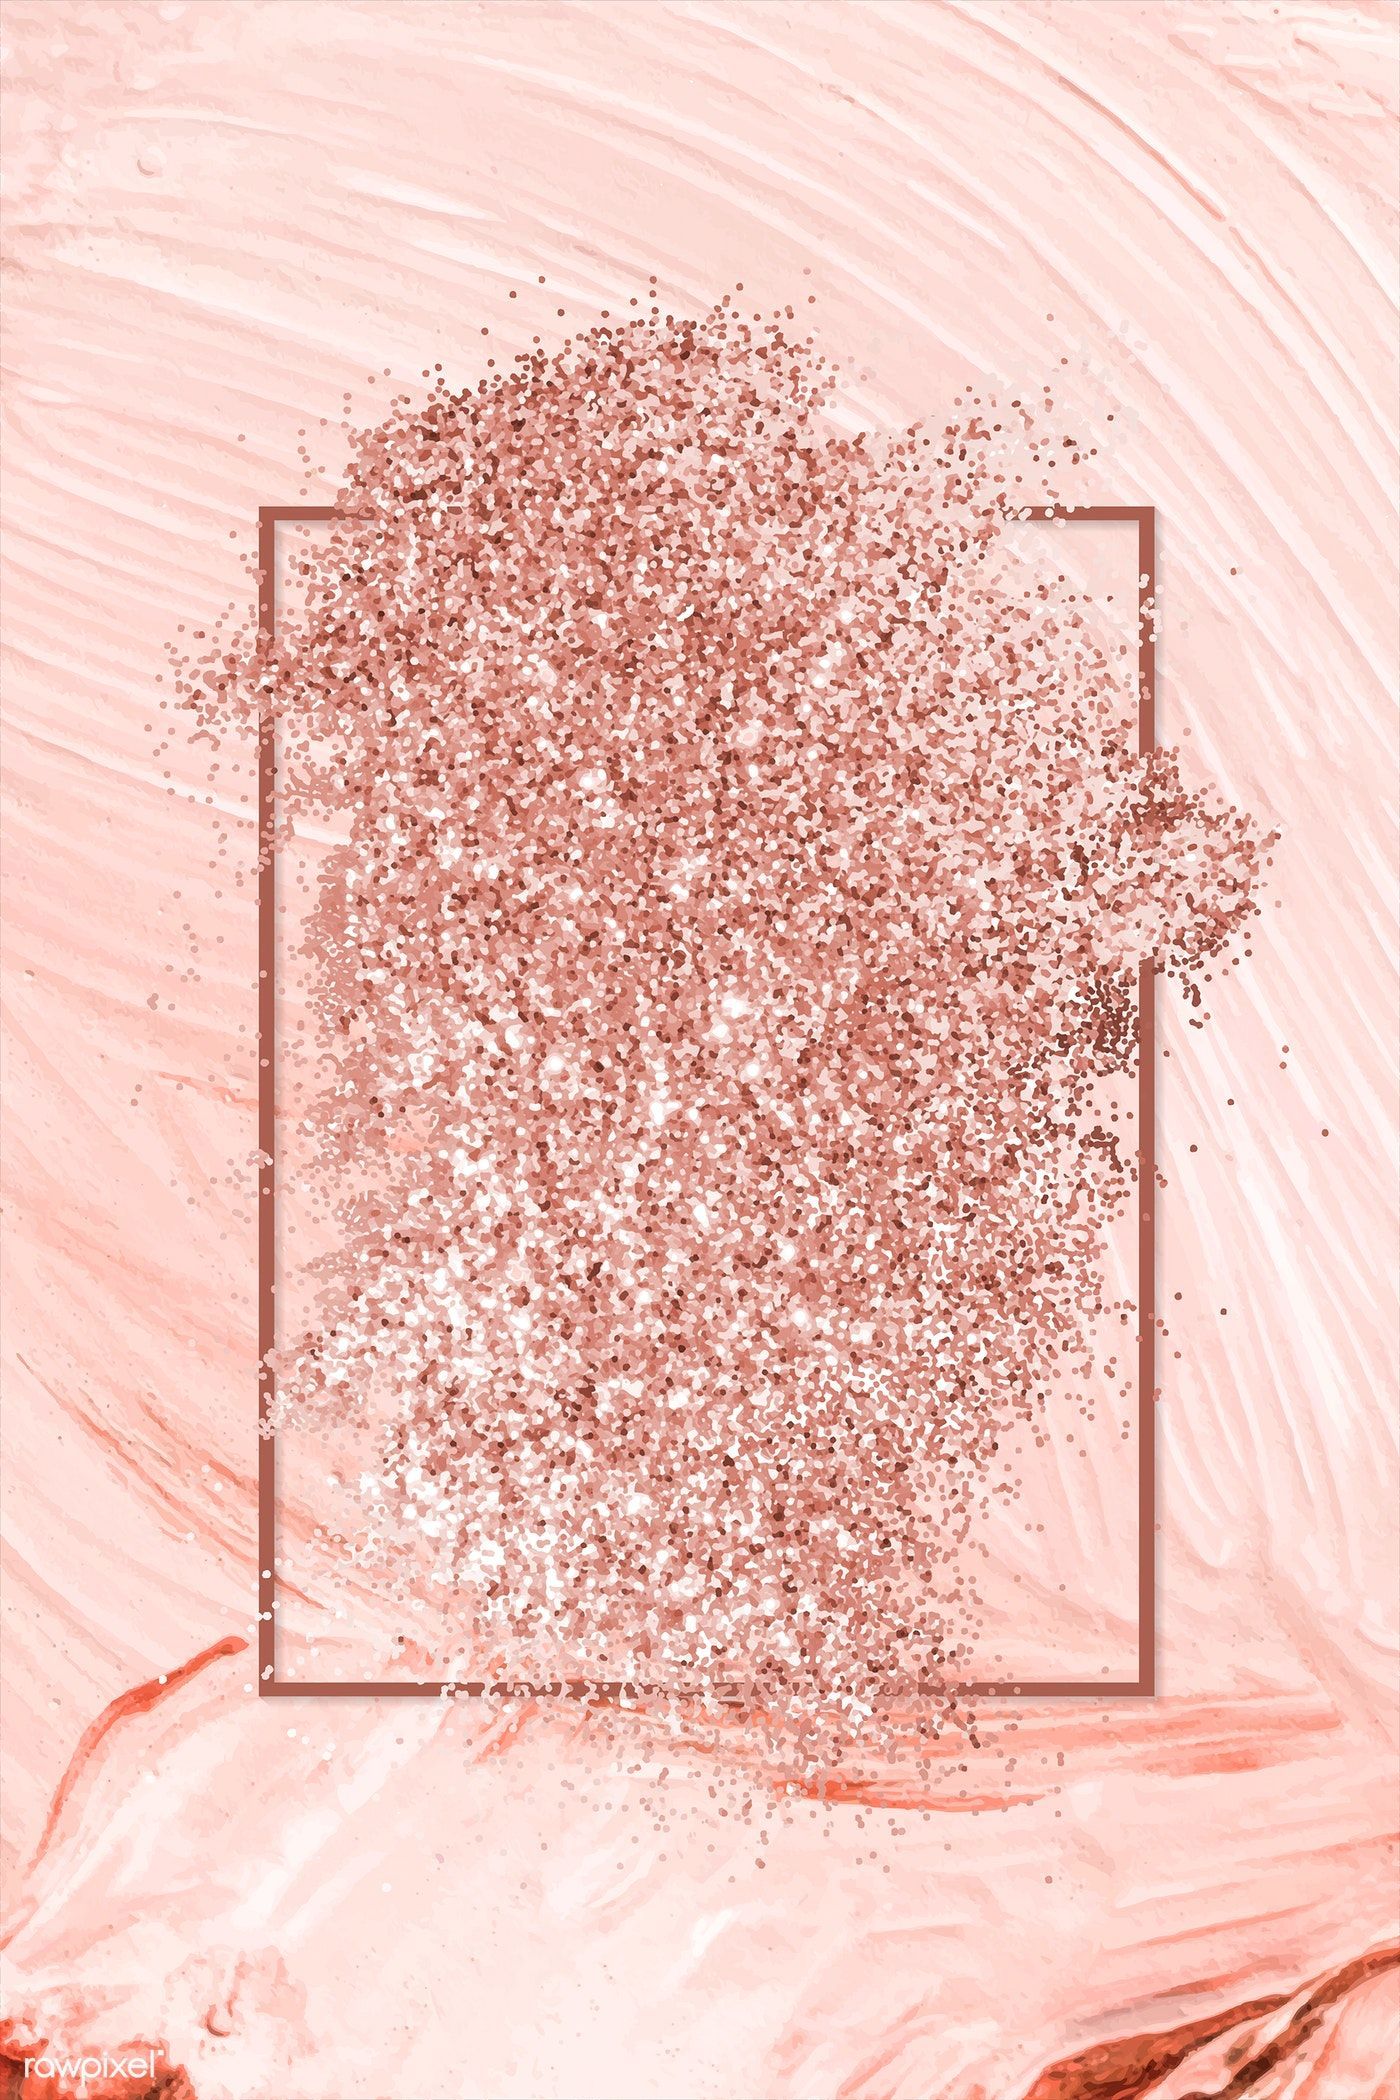 Download free vector of Pink gold glitter with a brownish red rhombus - Download free vector of Pink gold glitter with a brownish red rhombus -   11 beauty Background pastel ideas